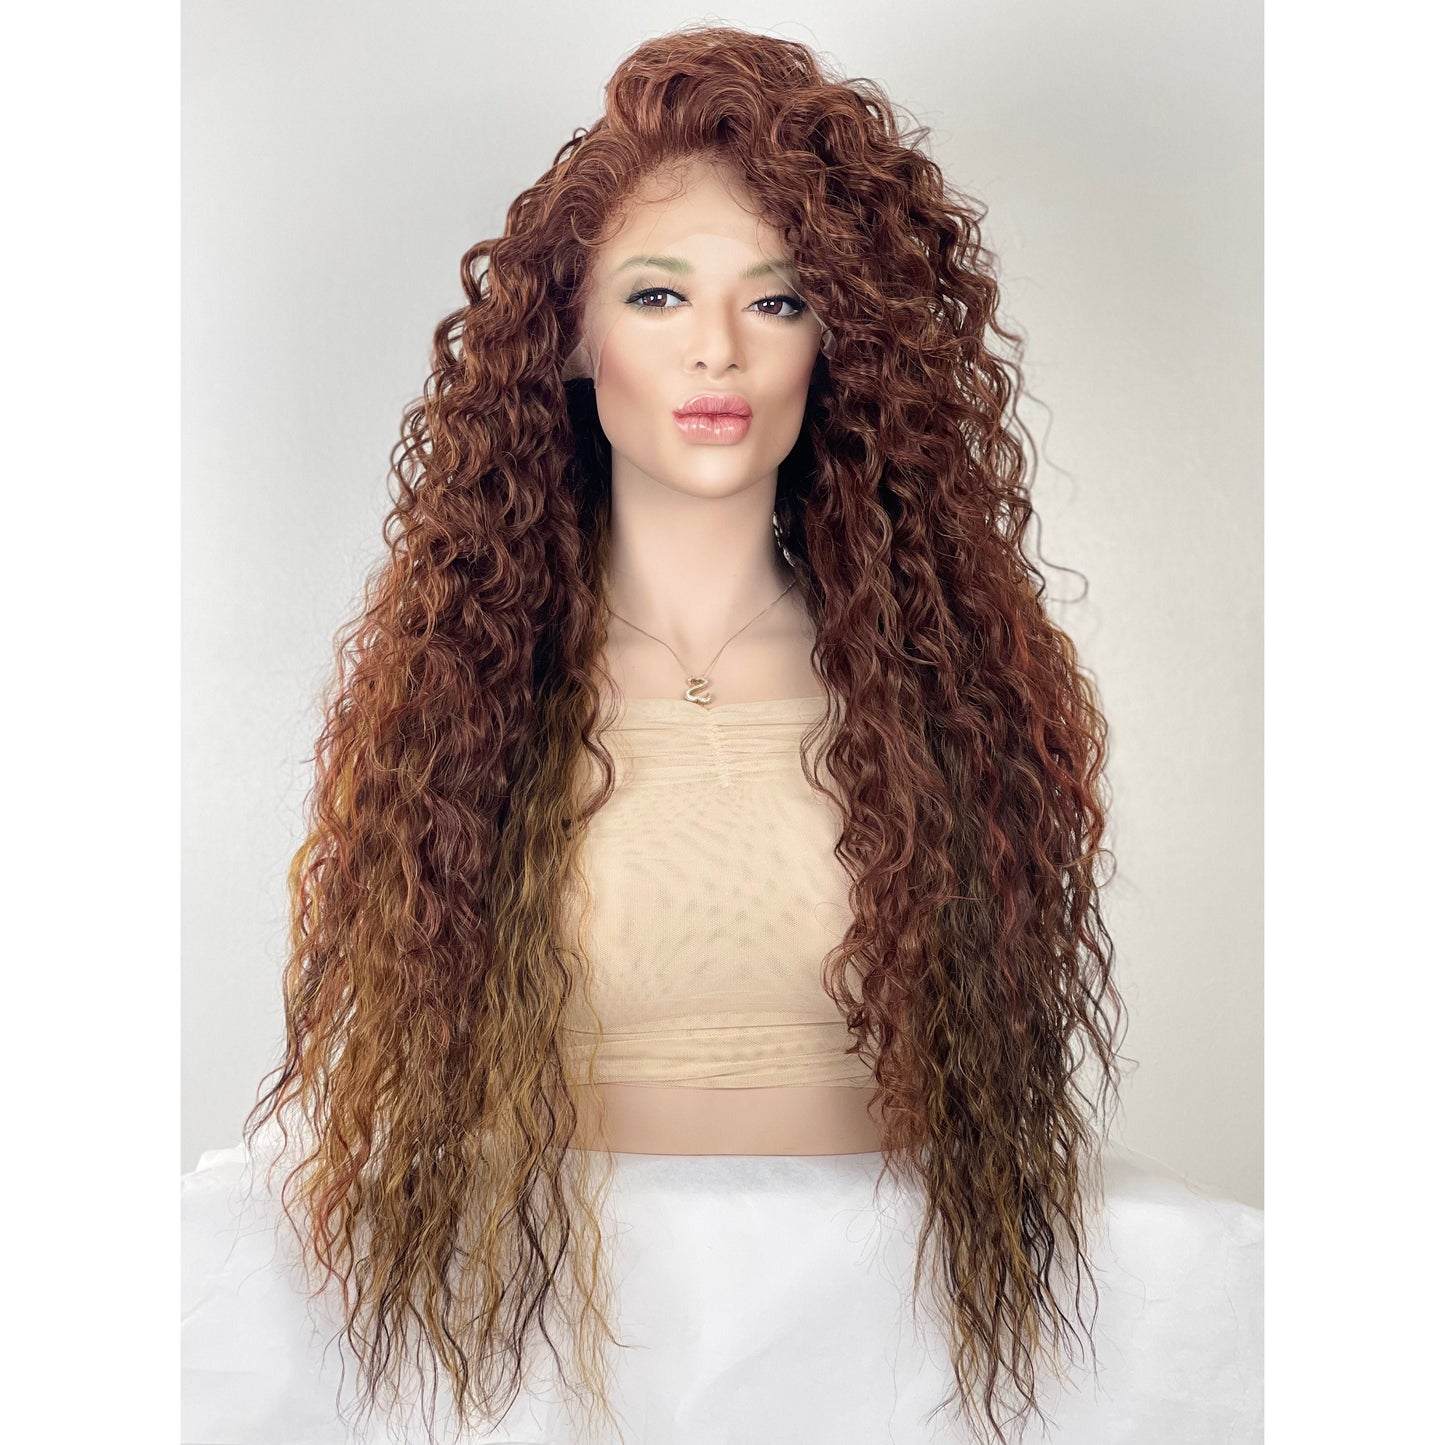 Brown Mix Honey Blonde Ombré 13x6 wide part lace front wig / Wavy Brown Luxury Human Hair Blend Wig